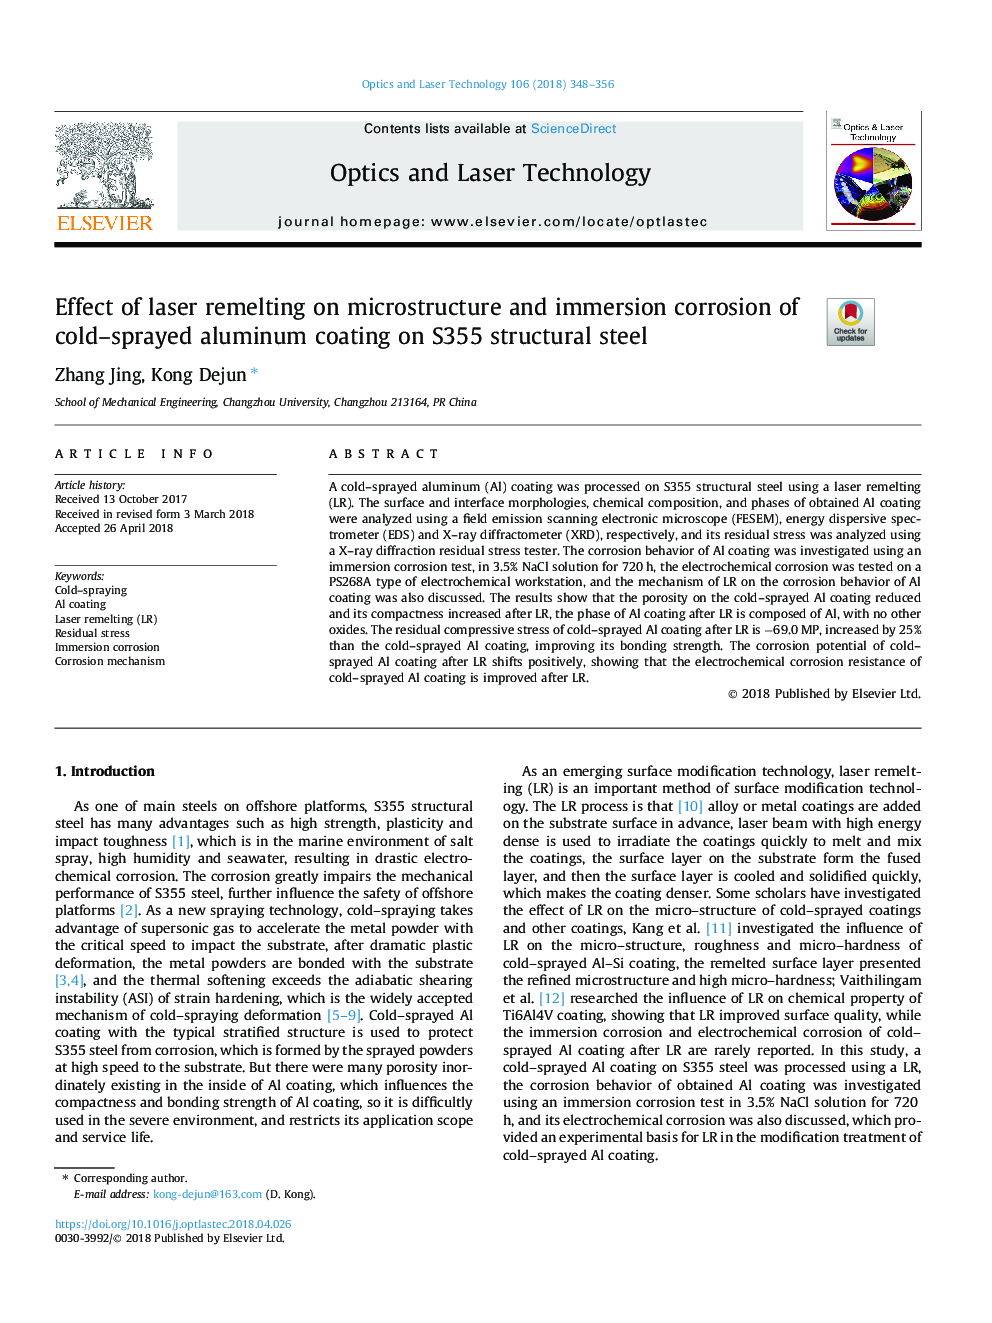 Effect of laser remelting on microstructure and immersion corrosion of cold-sprayed aluminum coating on S355 structural steel